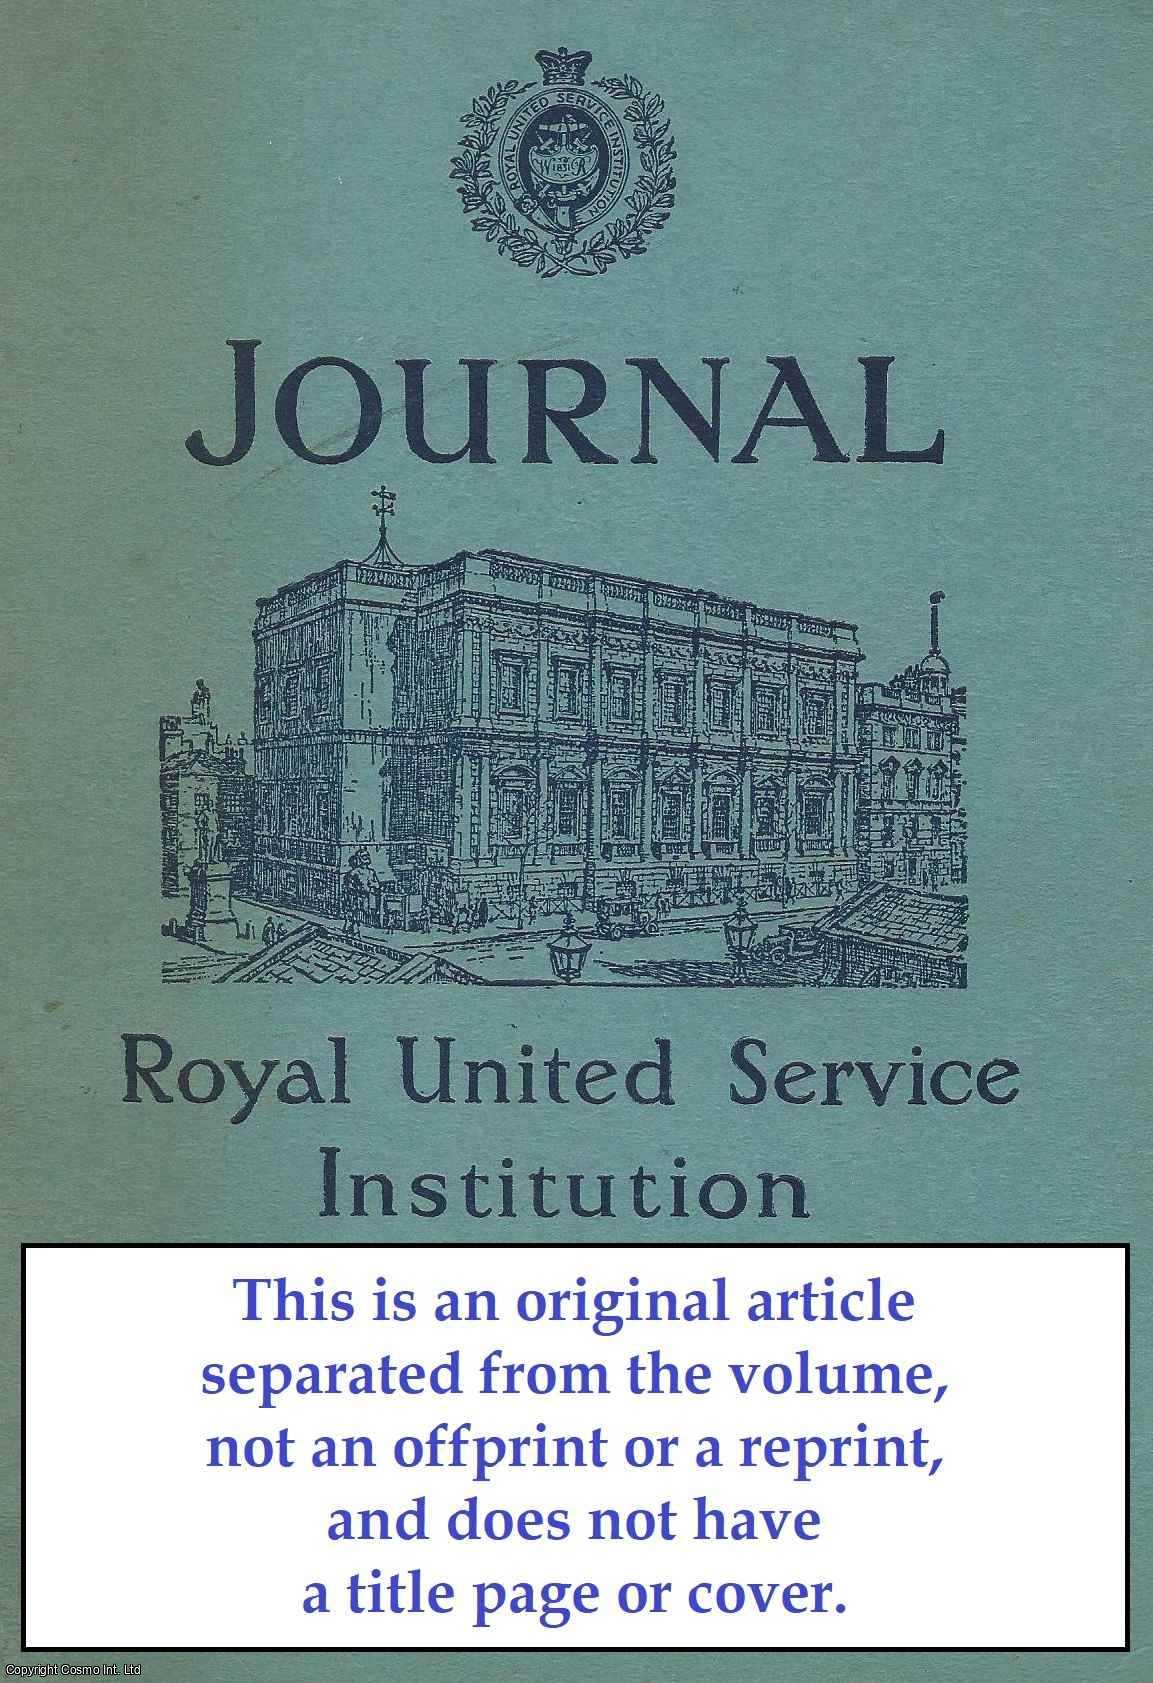 J. Enoch Powell - The Defence of Europe. An original article from The Royal United Service Institution Journal, 1968.